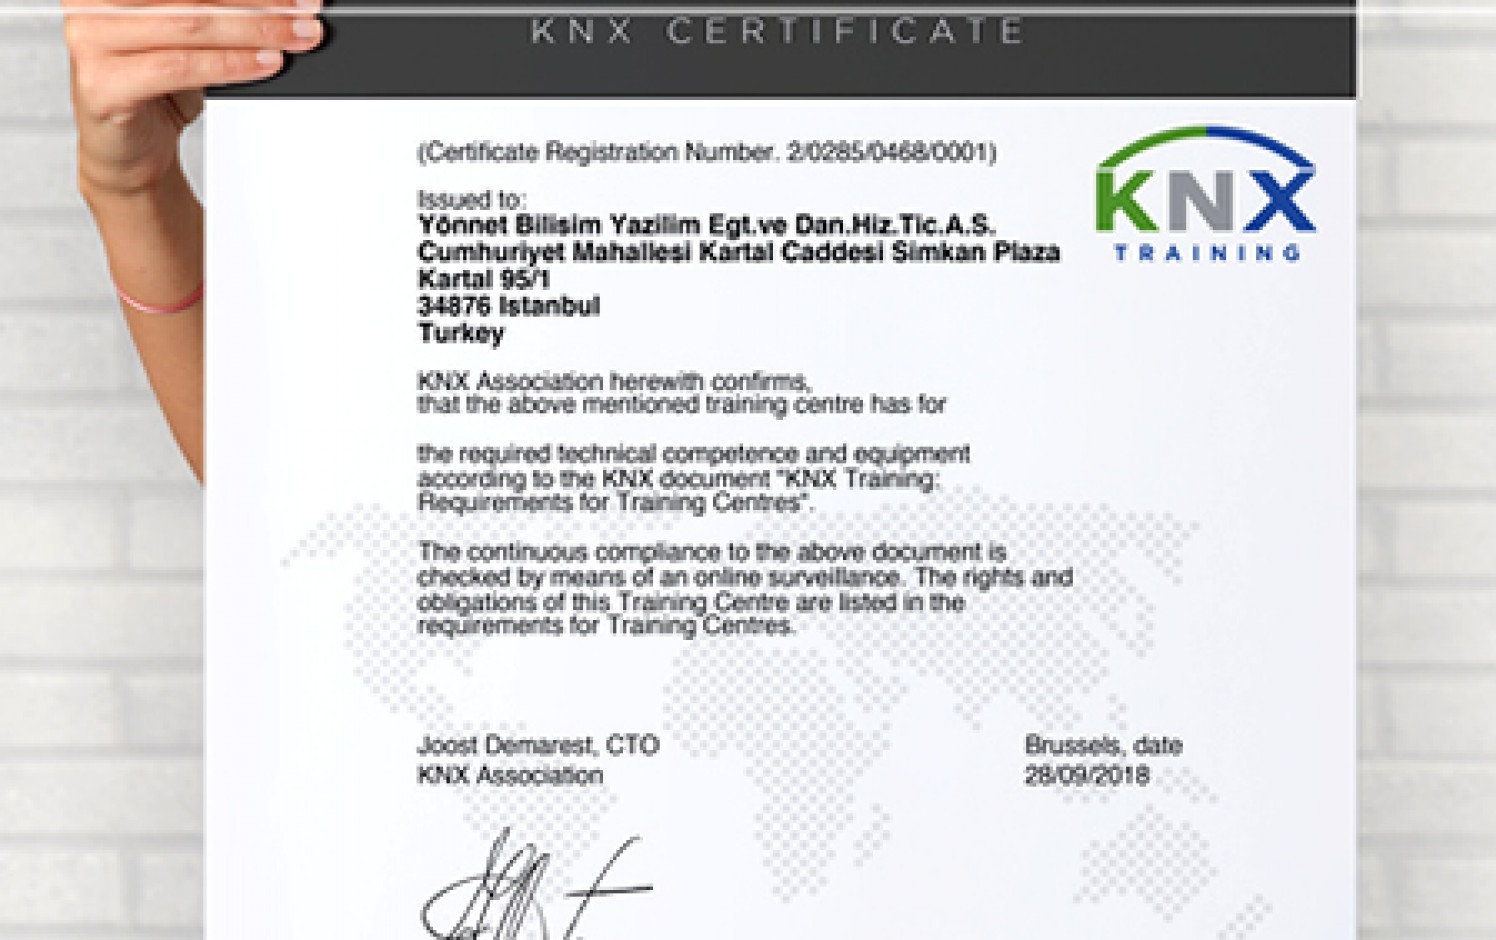 Interra, with the success of the KNX training center, also works for the growth and development of the sector